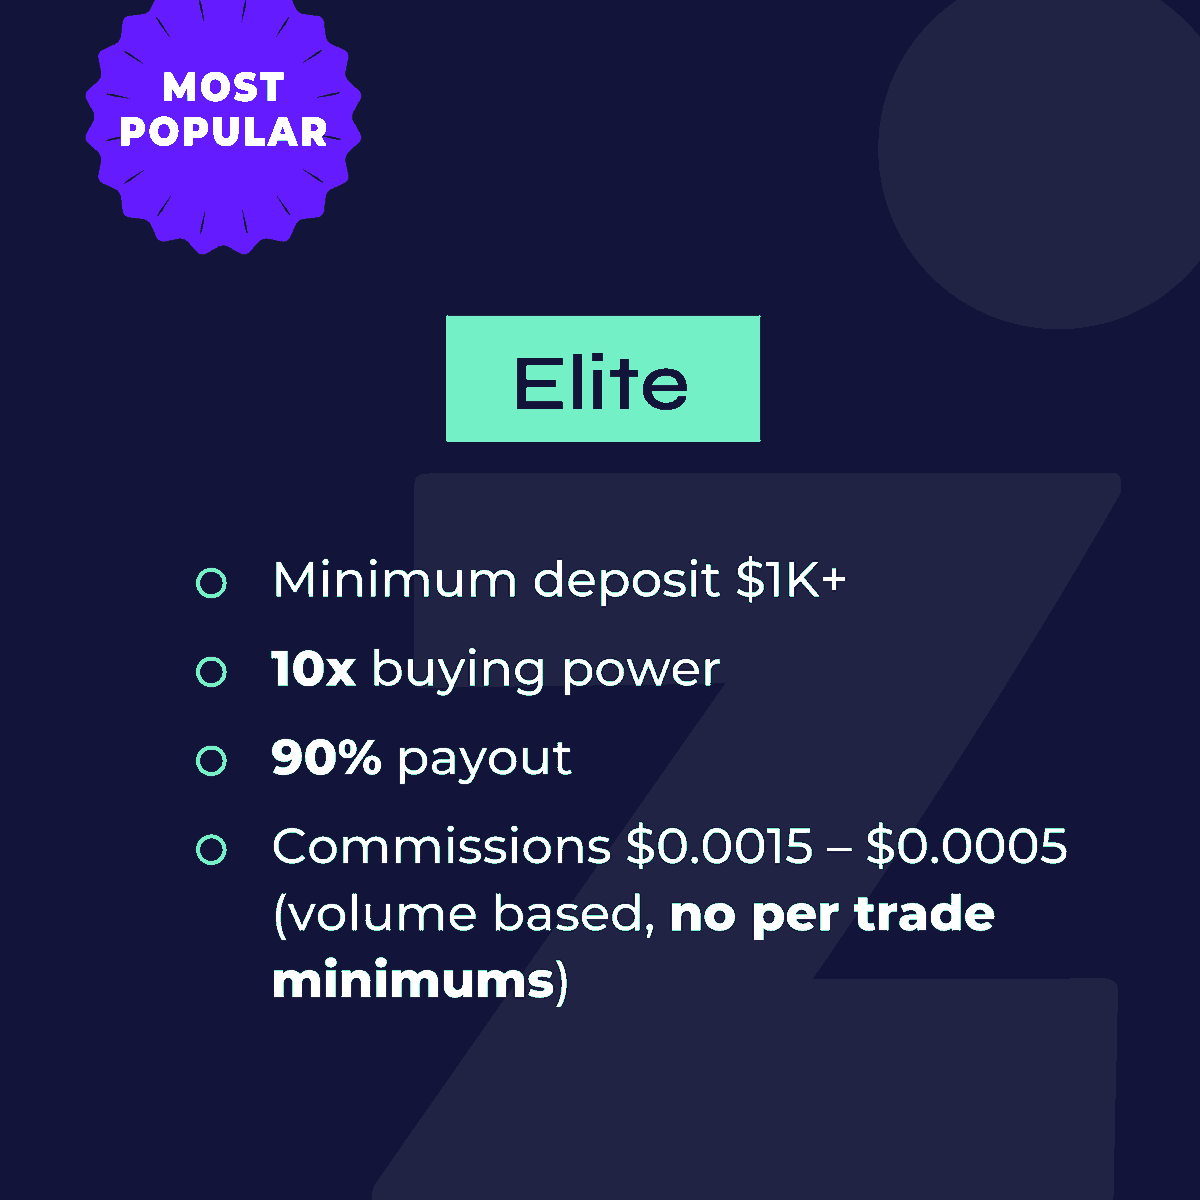 The trusted choice is Zimtra - Pro or Elite! Trade US Equities with 4x and retain 100% of your profits, or opt for 10x and retain 90%!

#Zimtra #TradingAccounts #FundedTrader #TradeSmart #FinancialFreedom #DayTrading #Stocks #Finance #TrustedTradingPartner